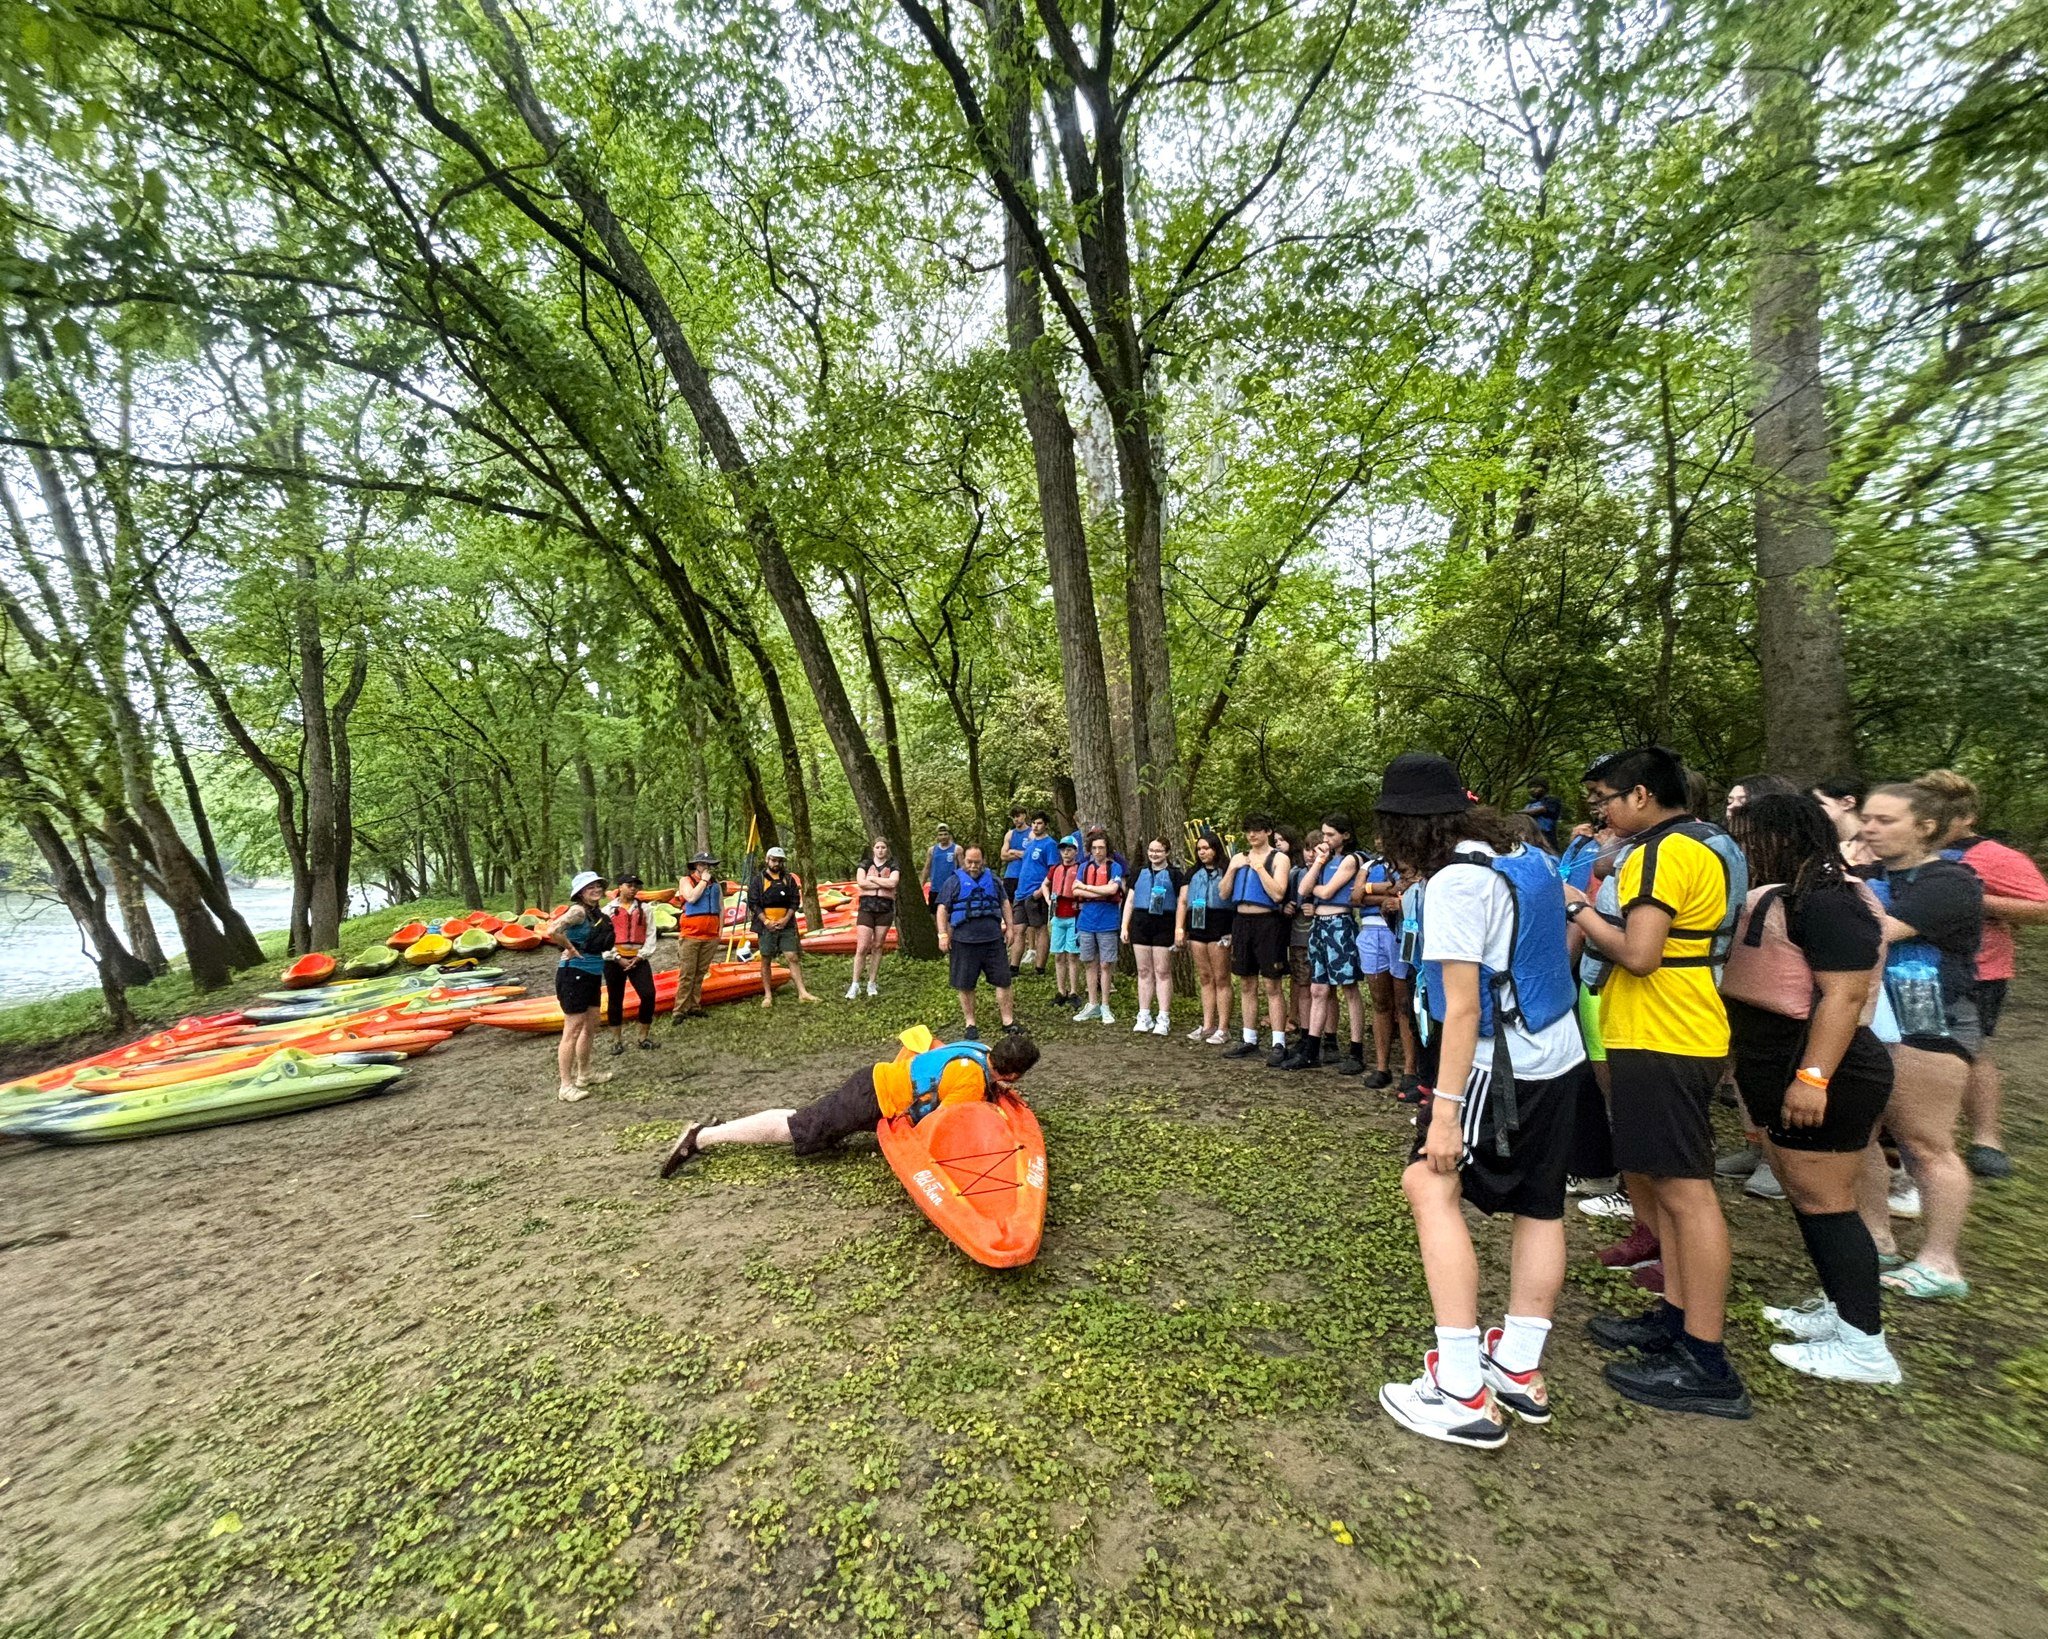 Always doing fun activities.
🚣😄
More than 80 teens joined us for our first spring kayaking adventure this past Saturday! We had a fun day on the Little Miami River, and it was great to see new faces alongside some Crew &quot;regulars.&quot; Mi Leig